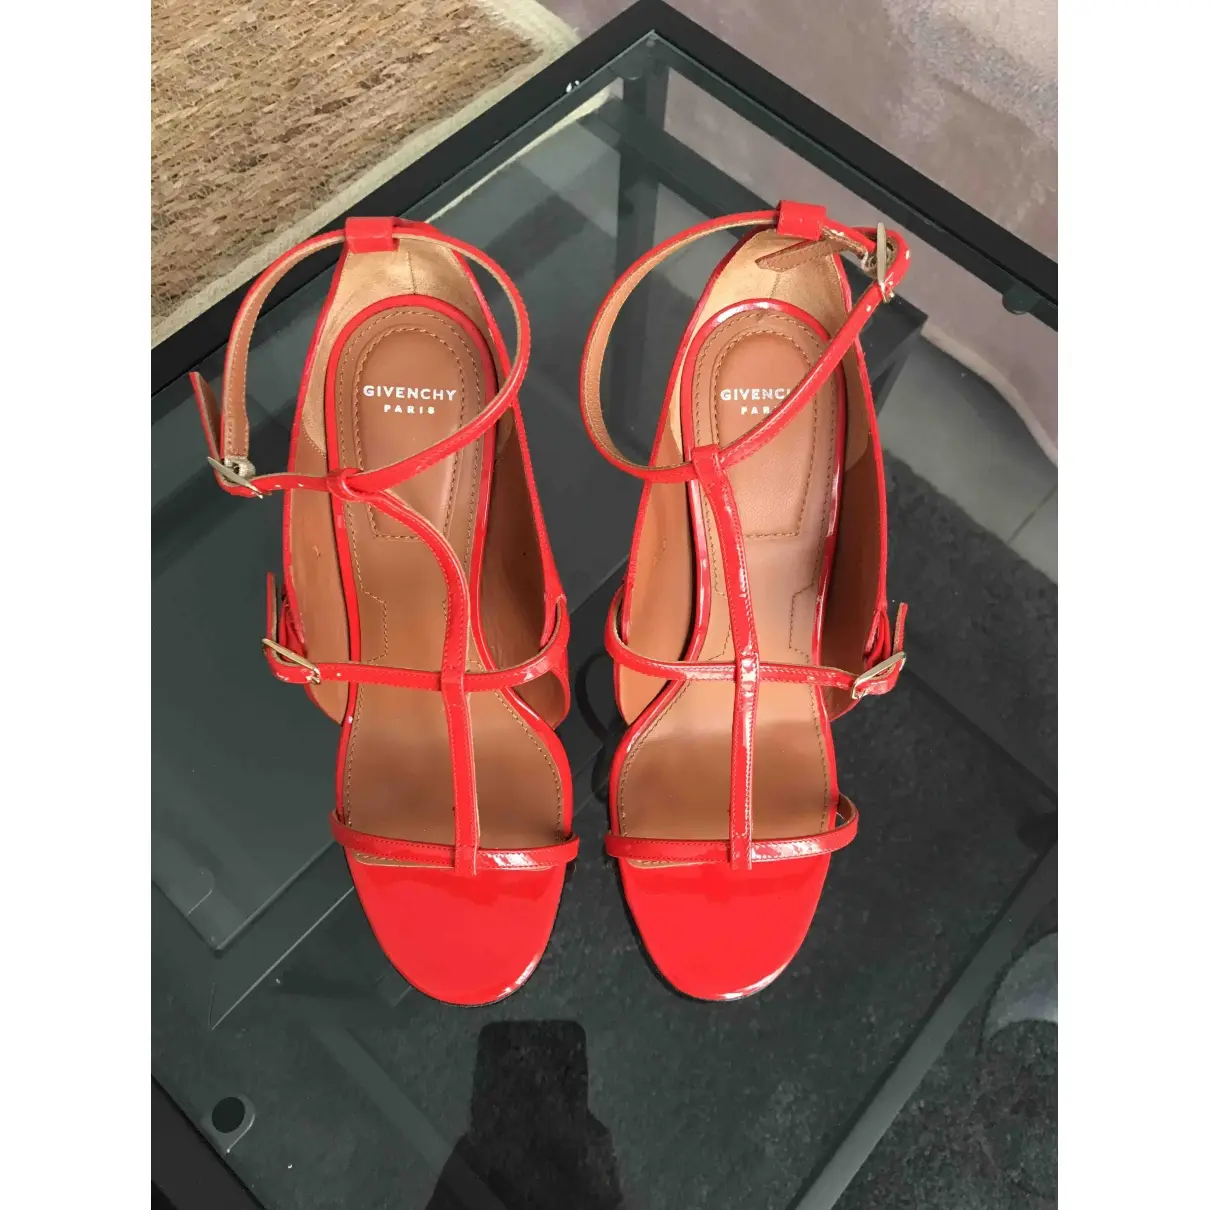 Givenchy Patent leather sandals for sale